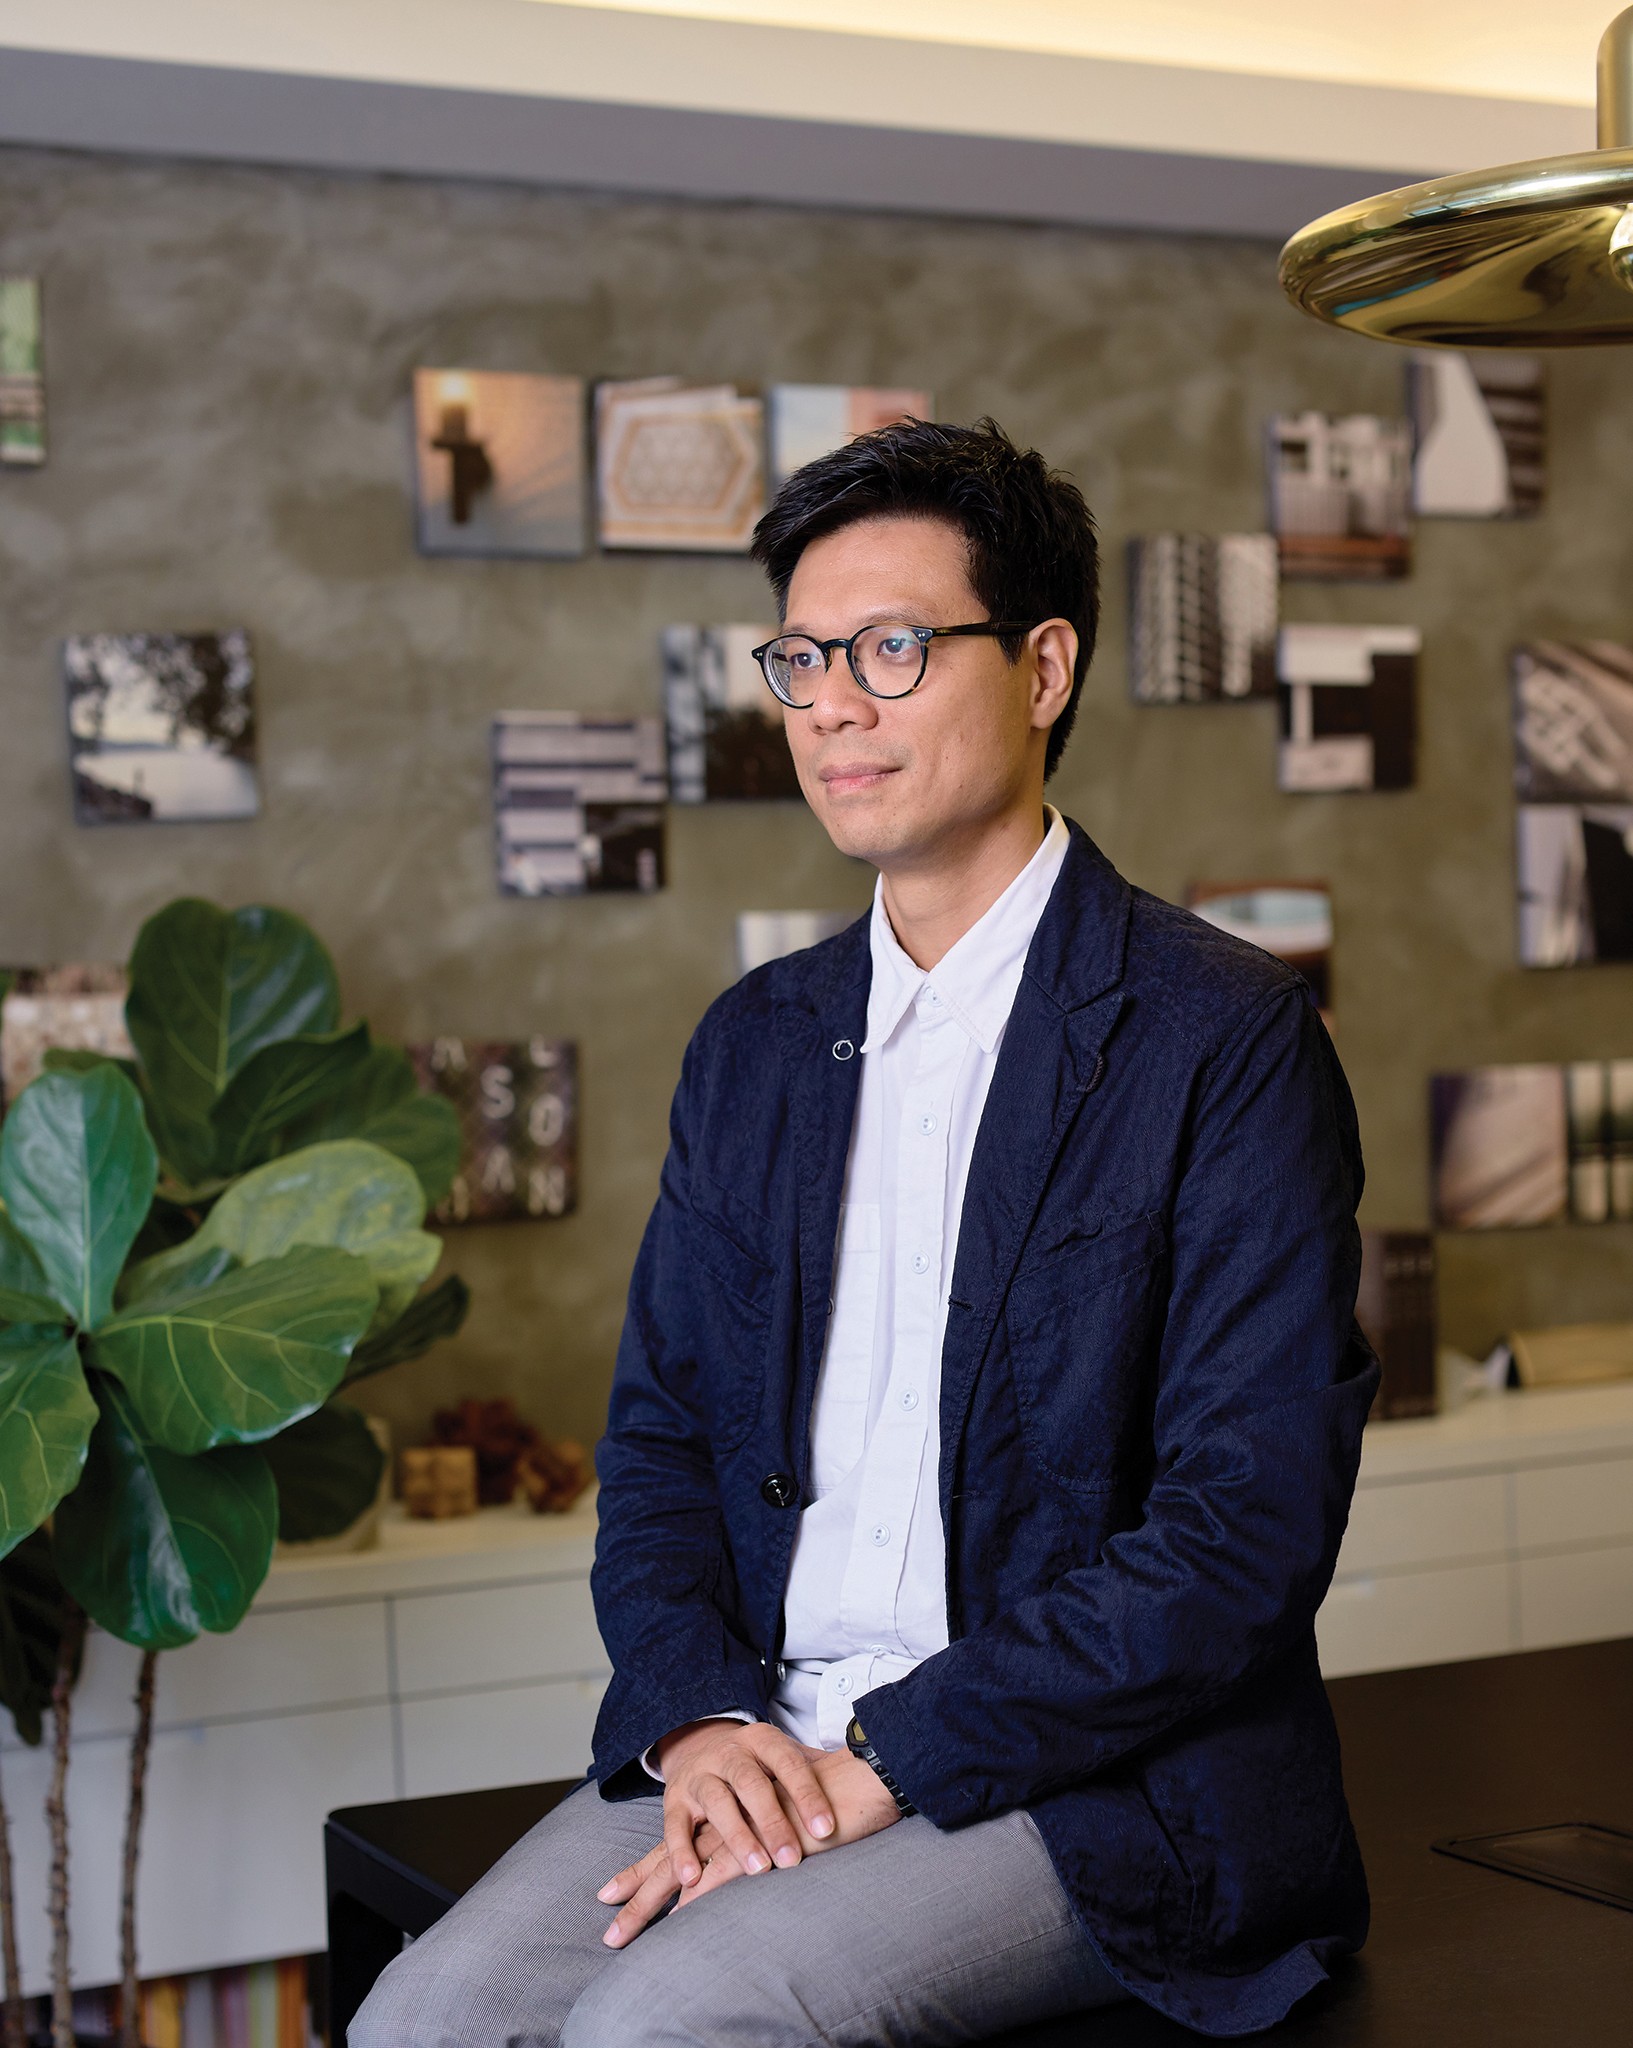 Frank Leung, principal of via architecture, the Hong Kong multidisciplinary design studio that he co-founded with his wife, Irene Lai, in 2009.